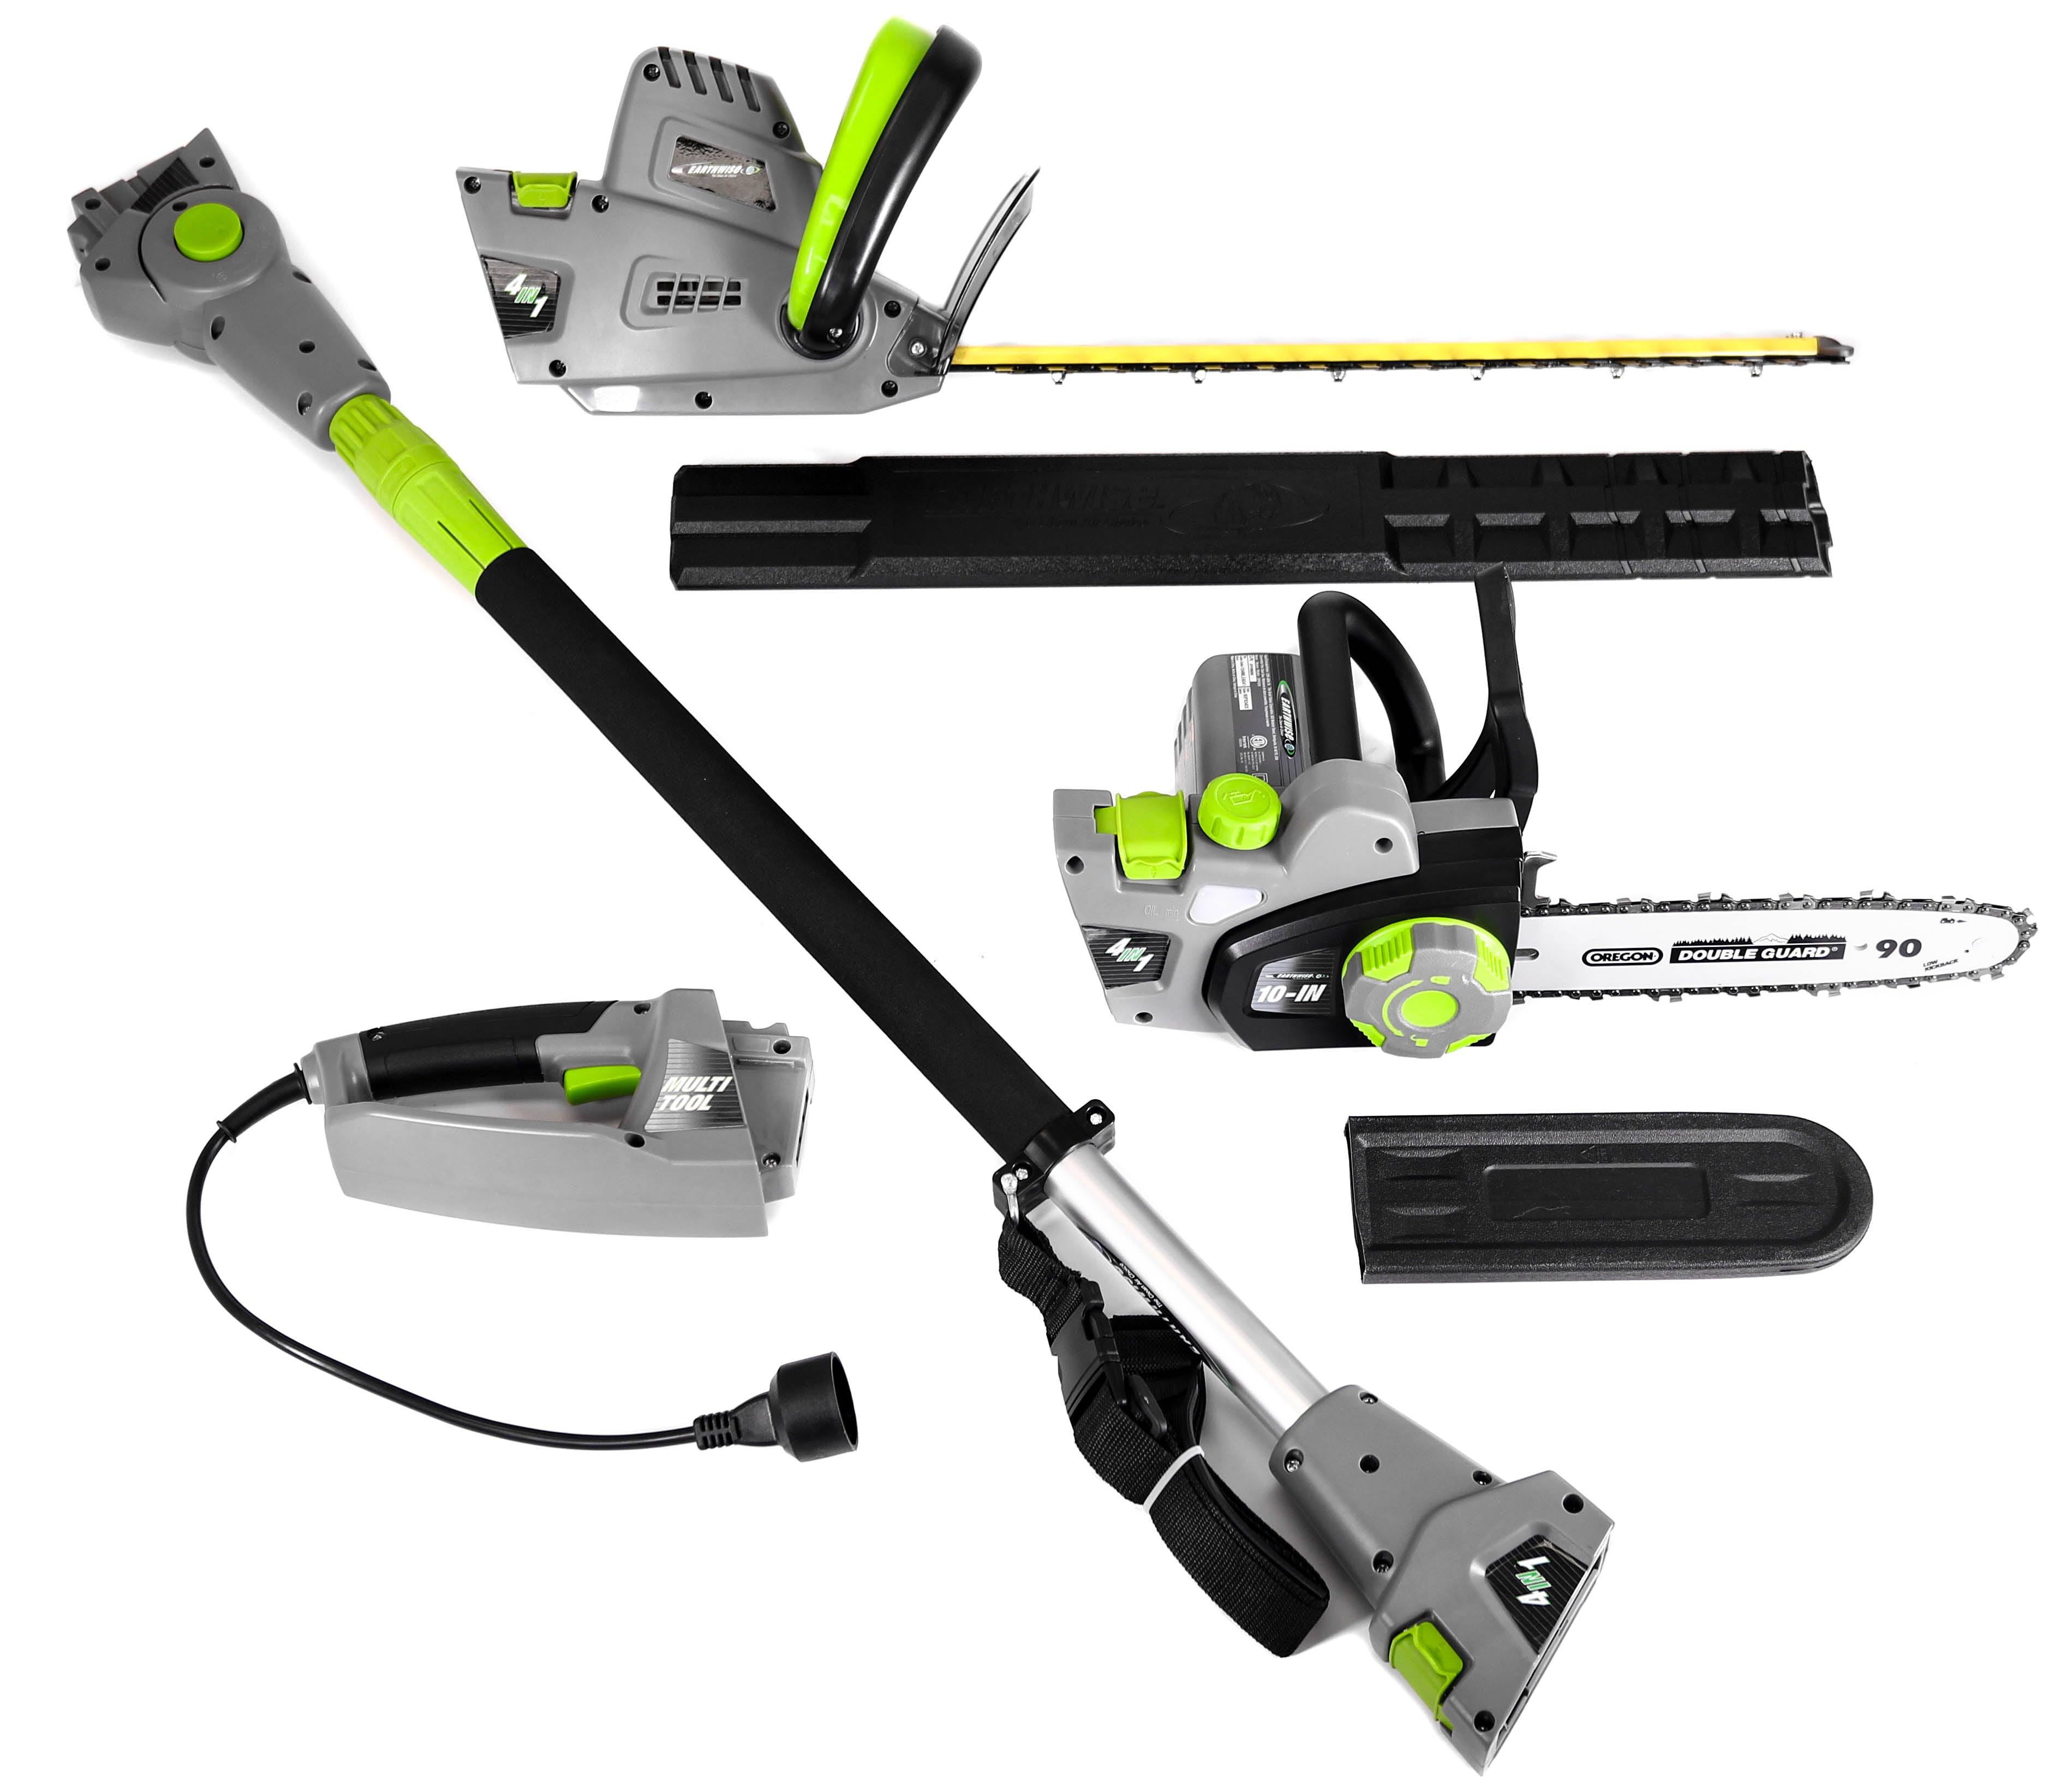 Earthwise Power Tools by ALM 120V Corded 4 in 1 Pole Saw/Hedge Trimmer